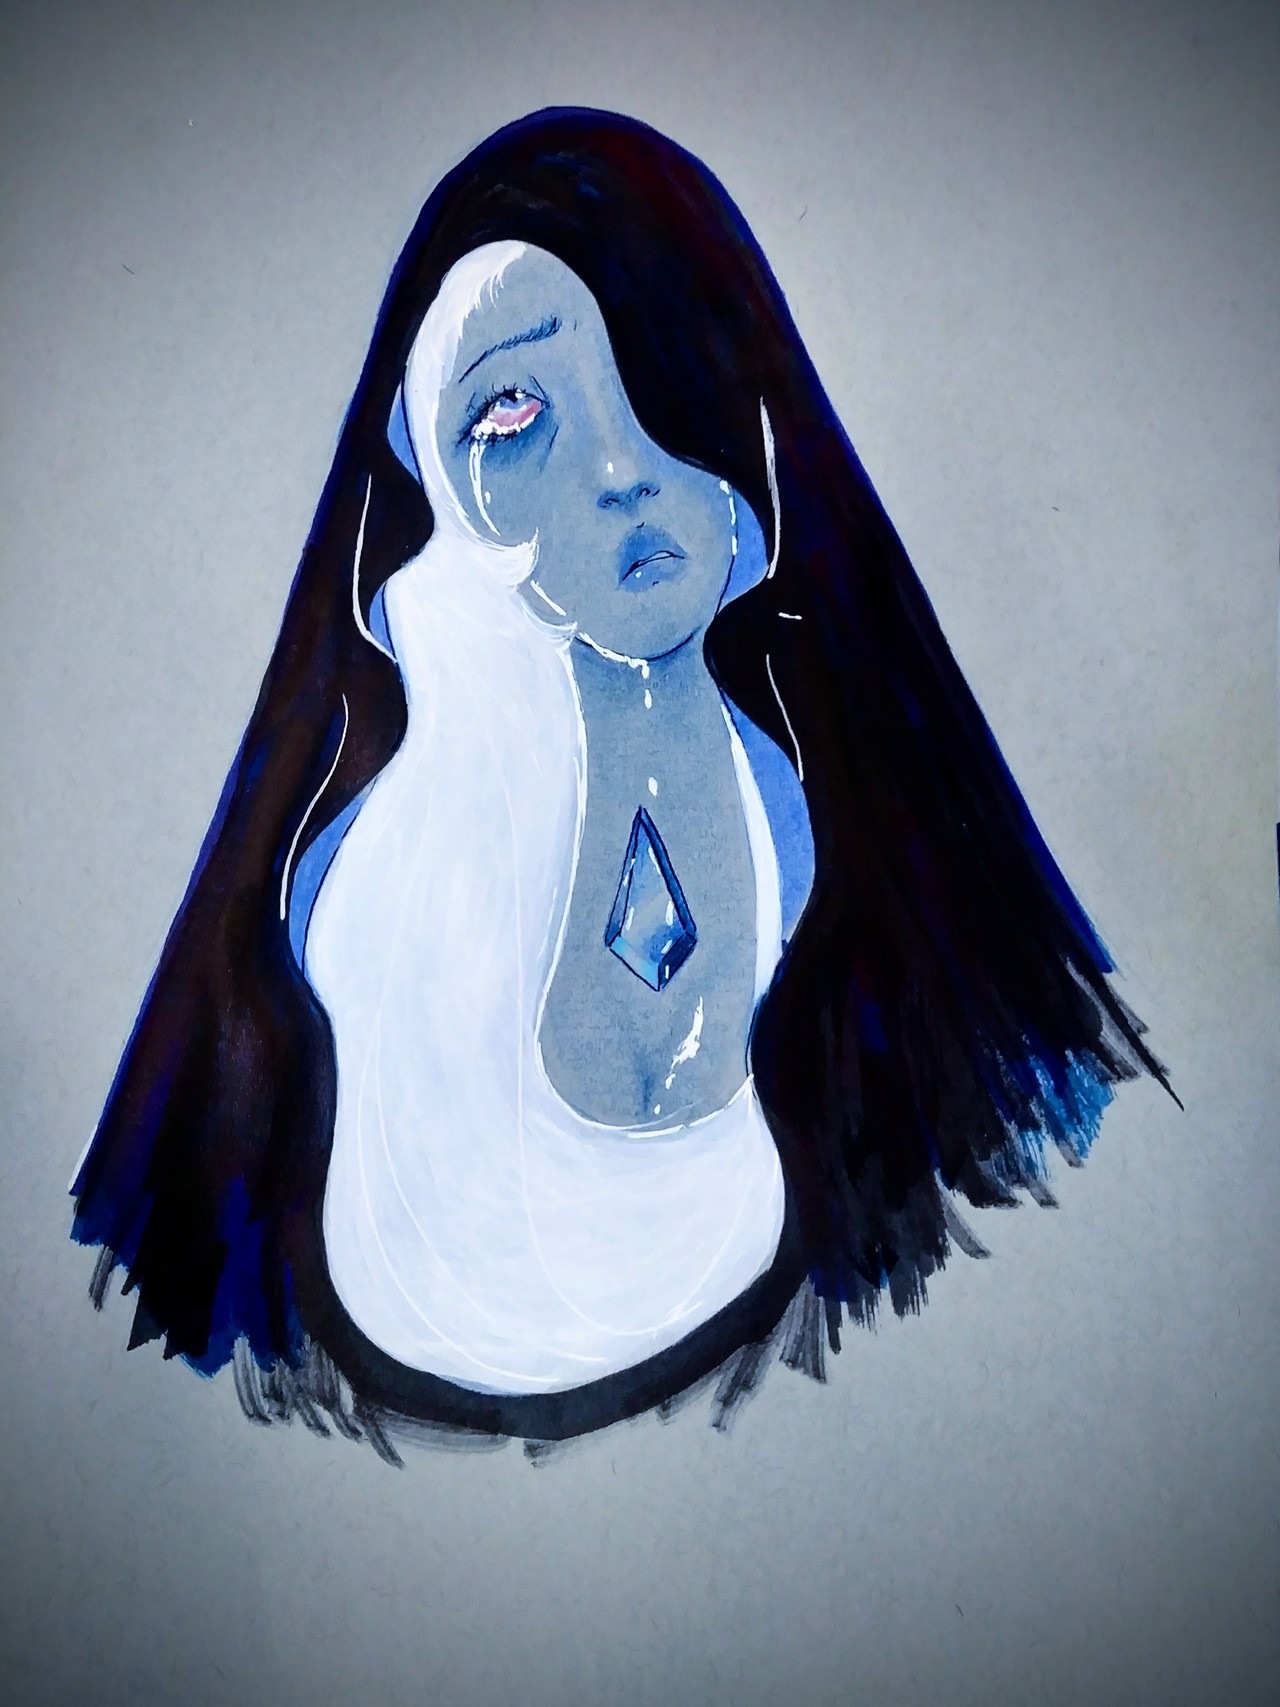 “Blue” Remember when I would post art on here?!